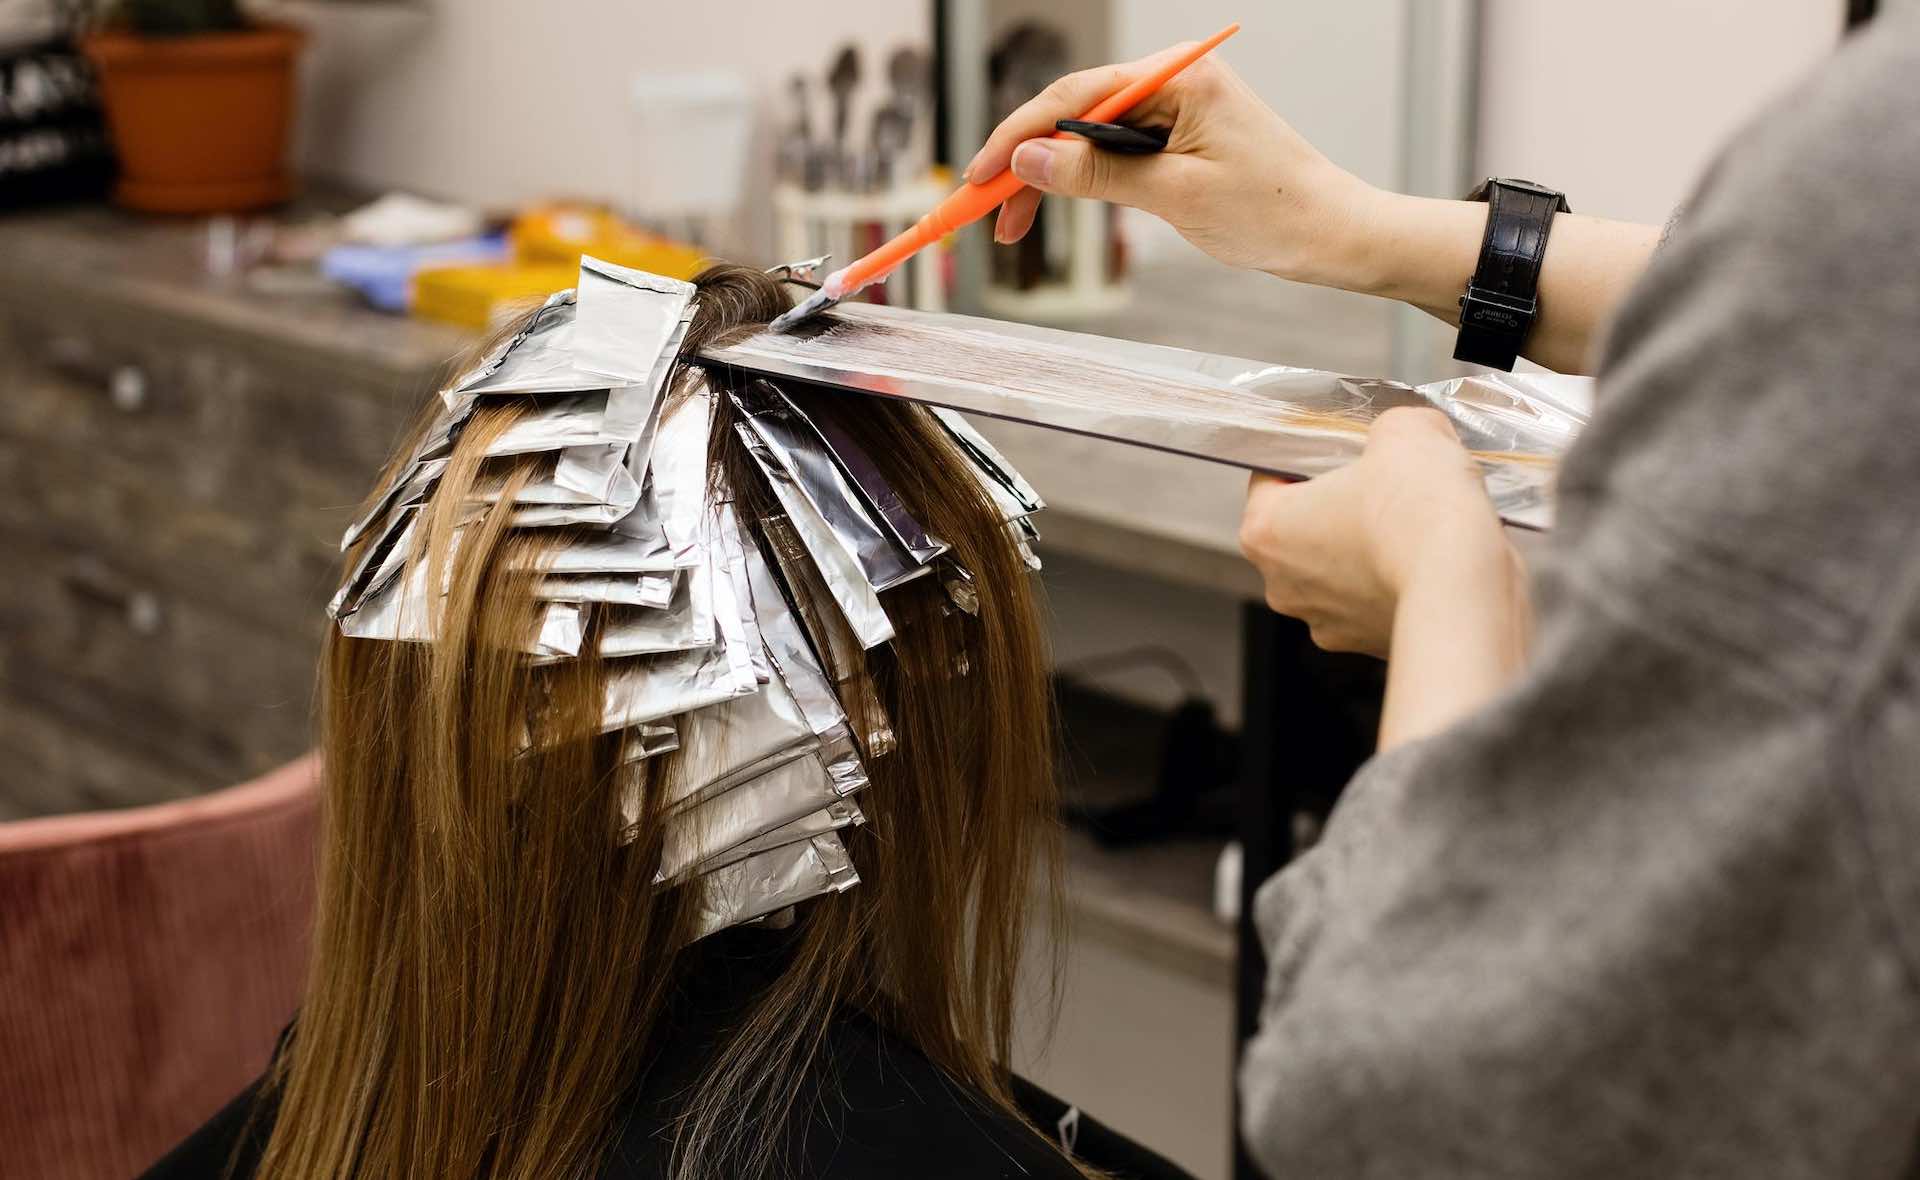 FDA proposes ban on hair straighteners linked to cancer risks